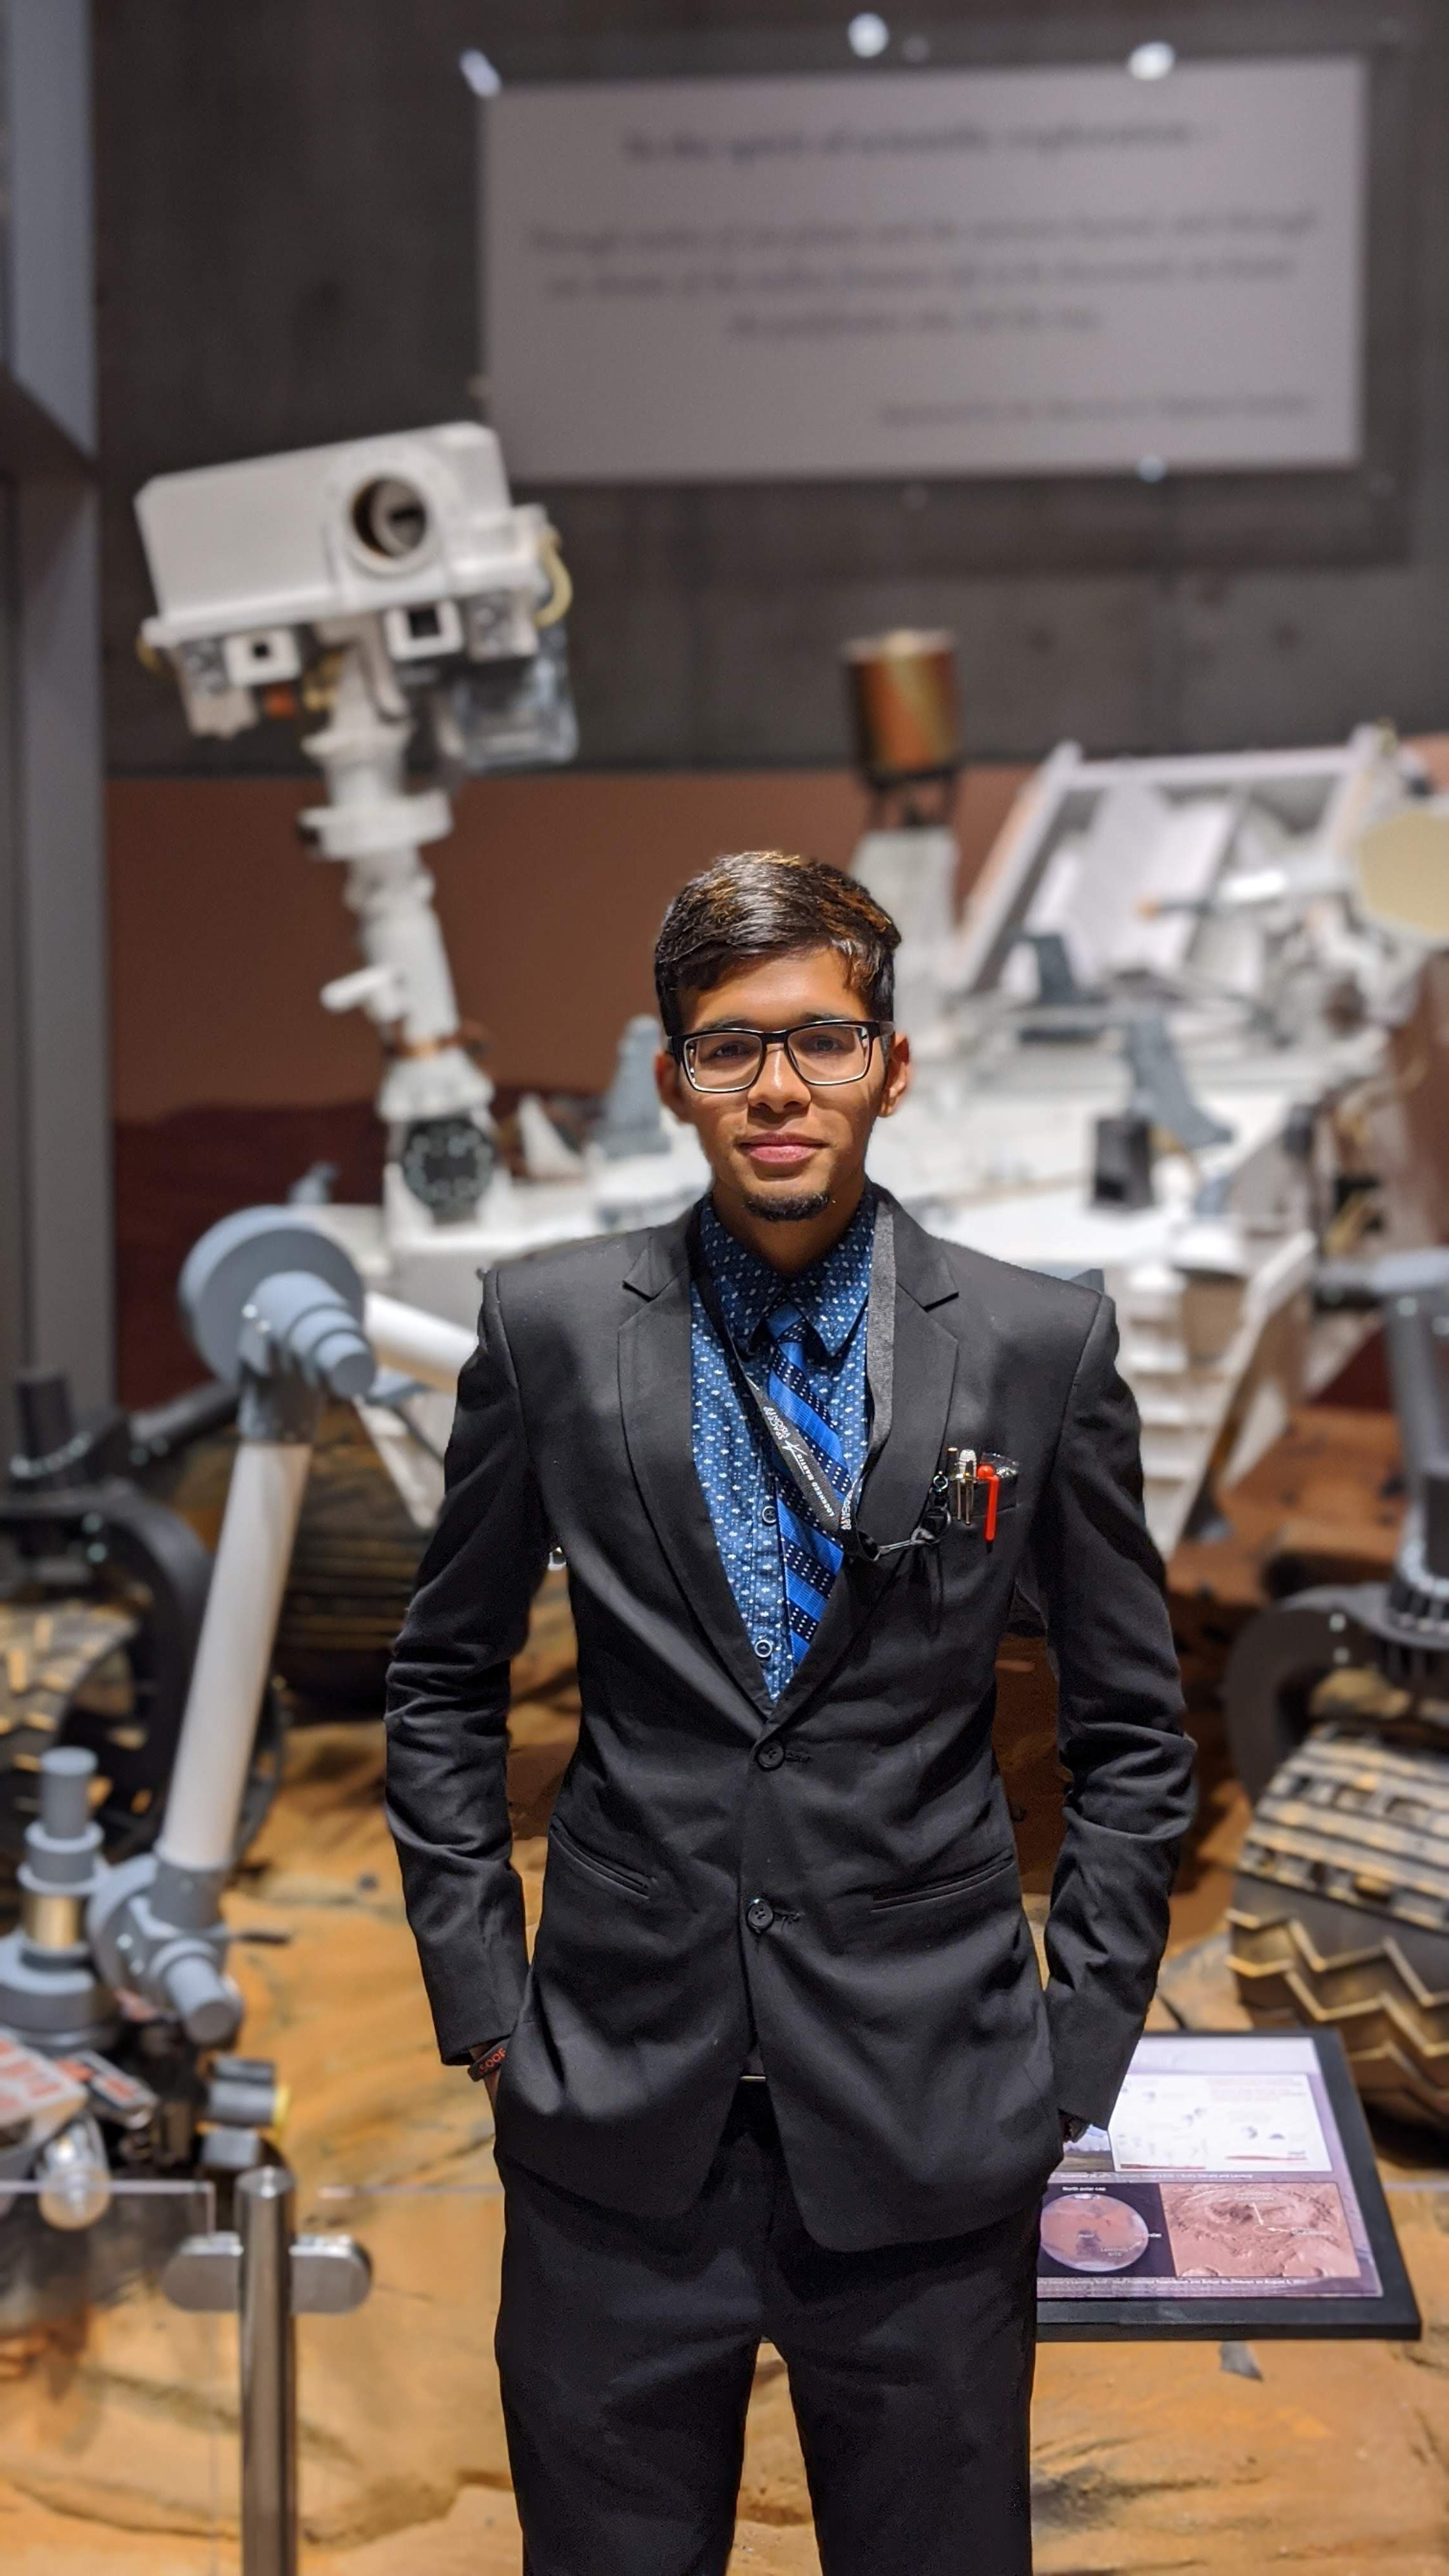 Arsh Nadkarni stands in front of rover model